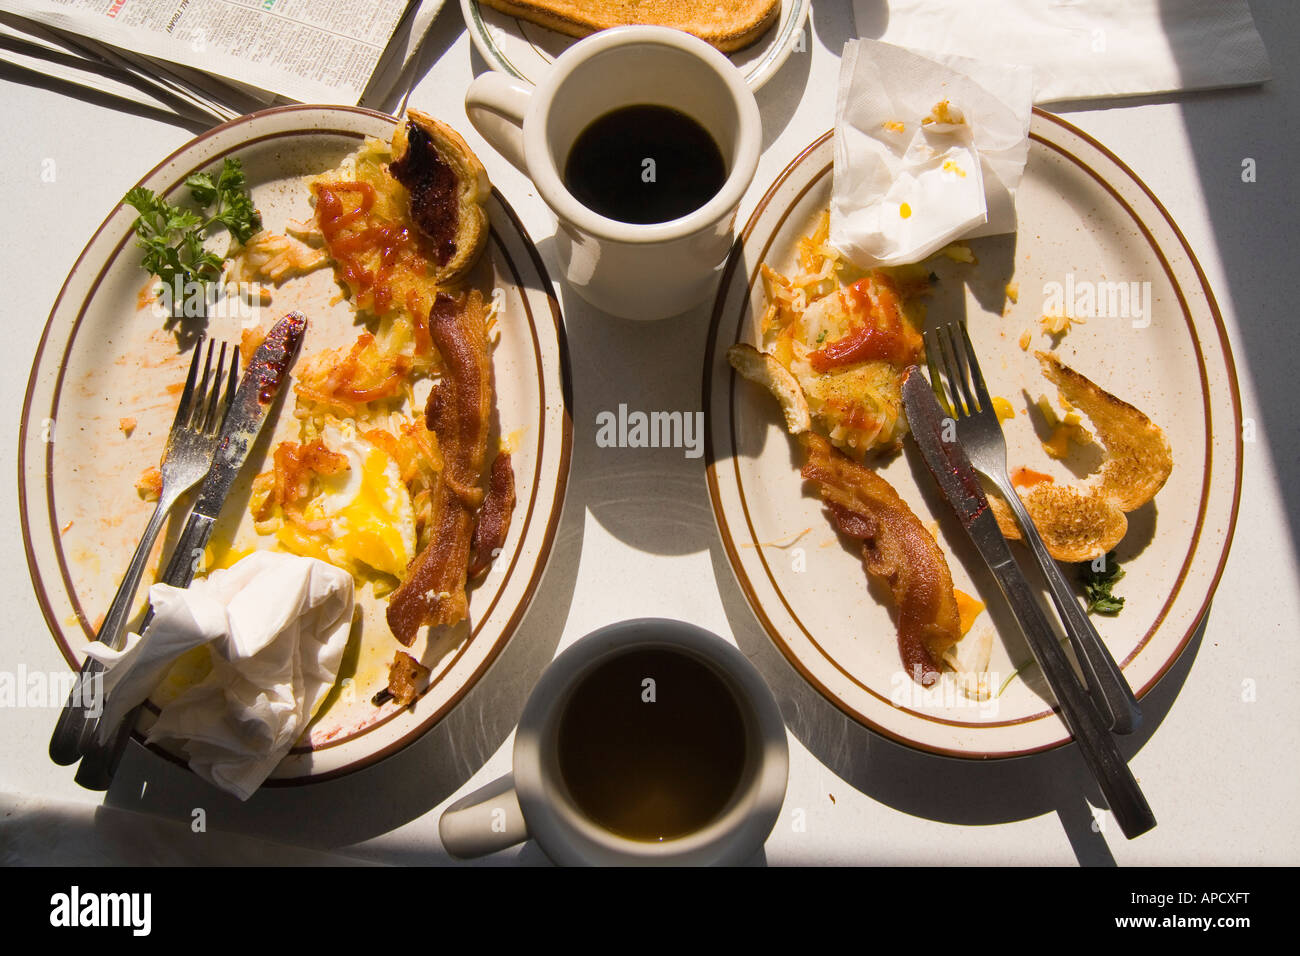 Two finished breakfasts on a table at a diner in Truckee, California Stock Photo